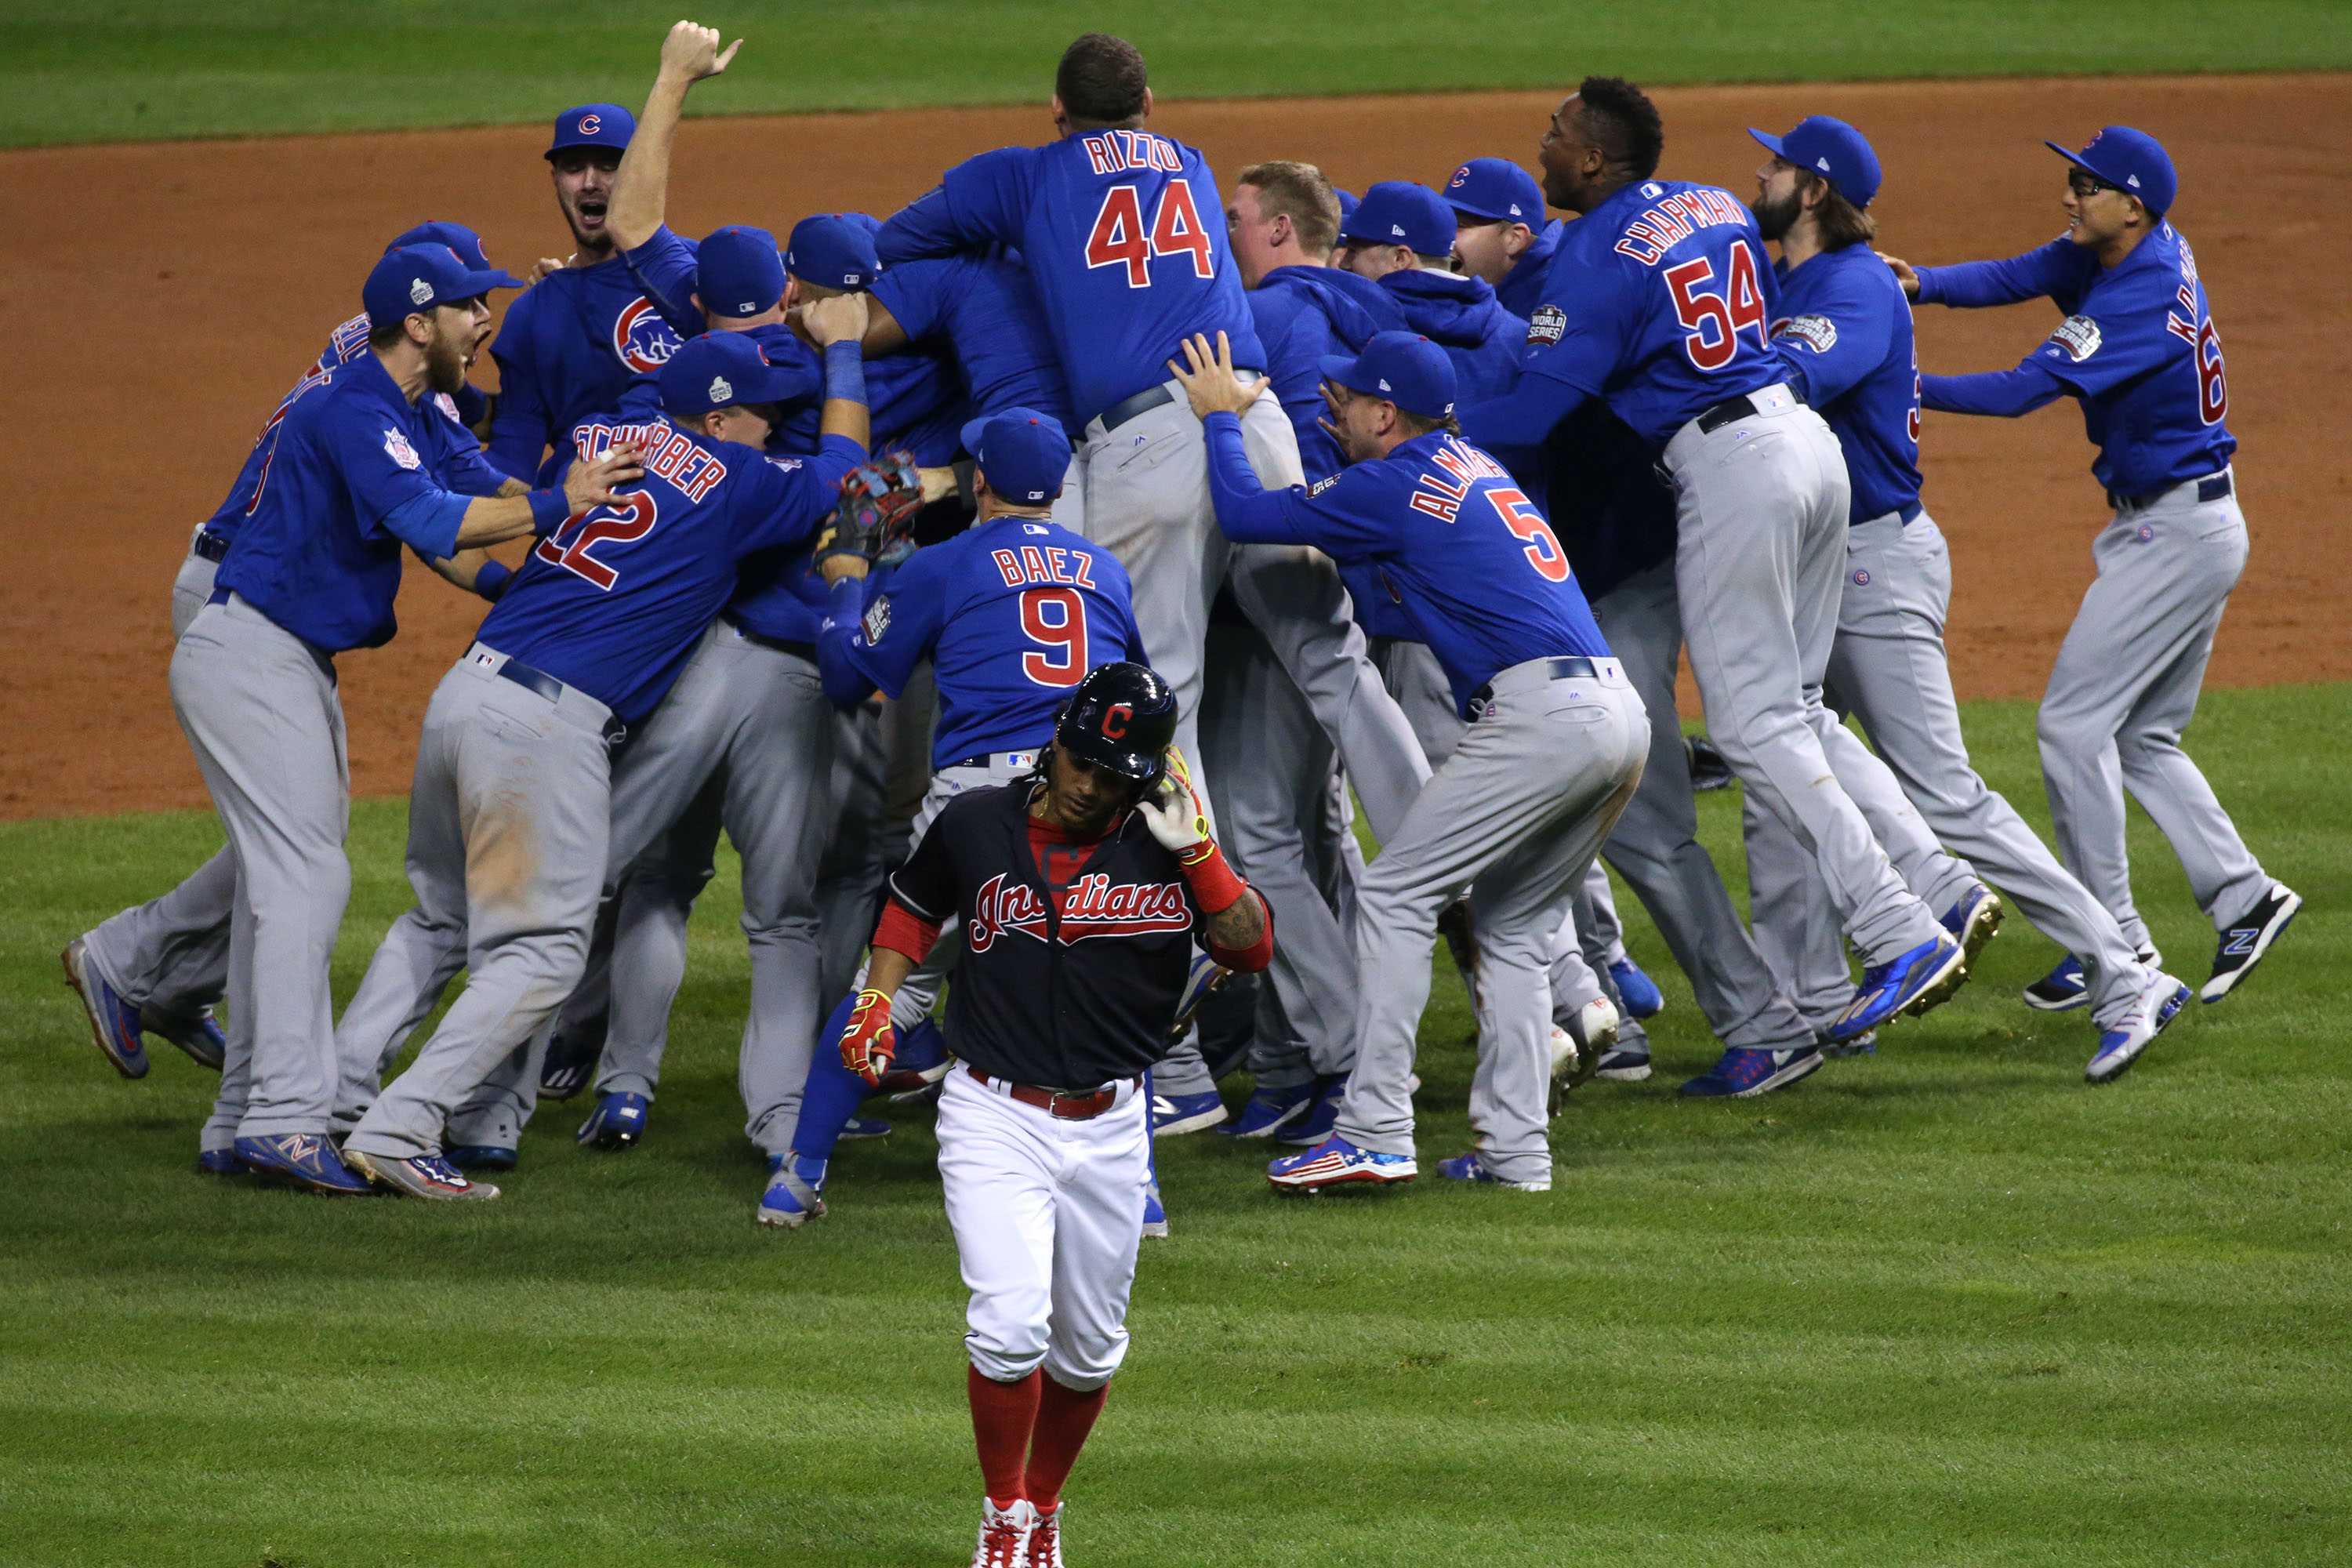 Cubs win World Series for first time in 108 years